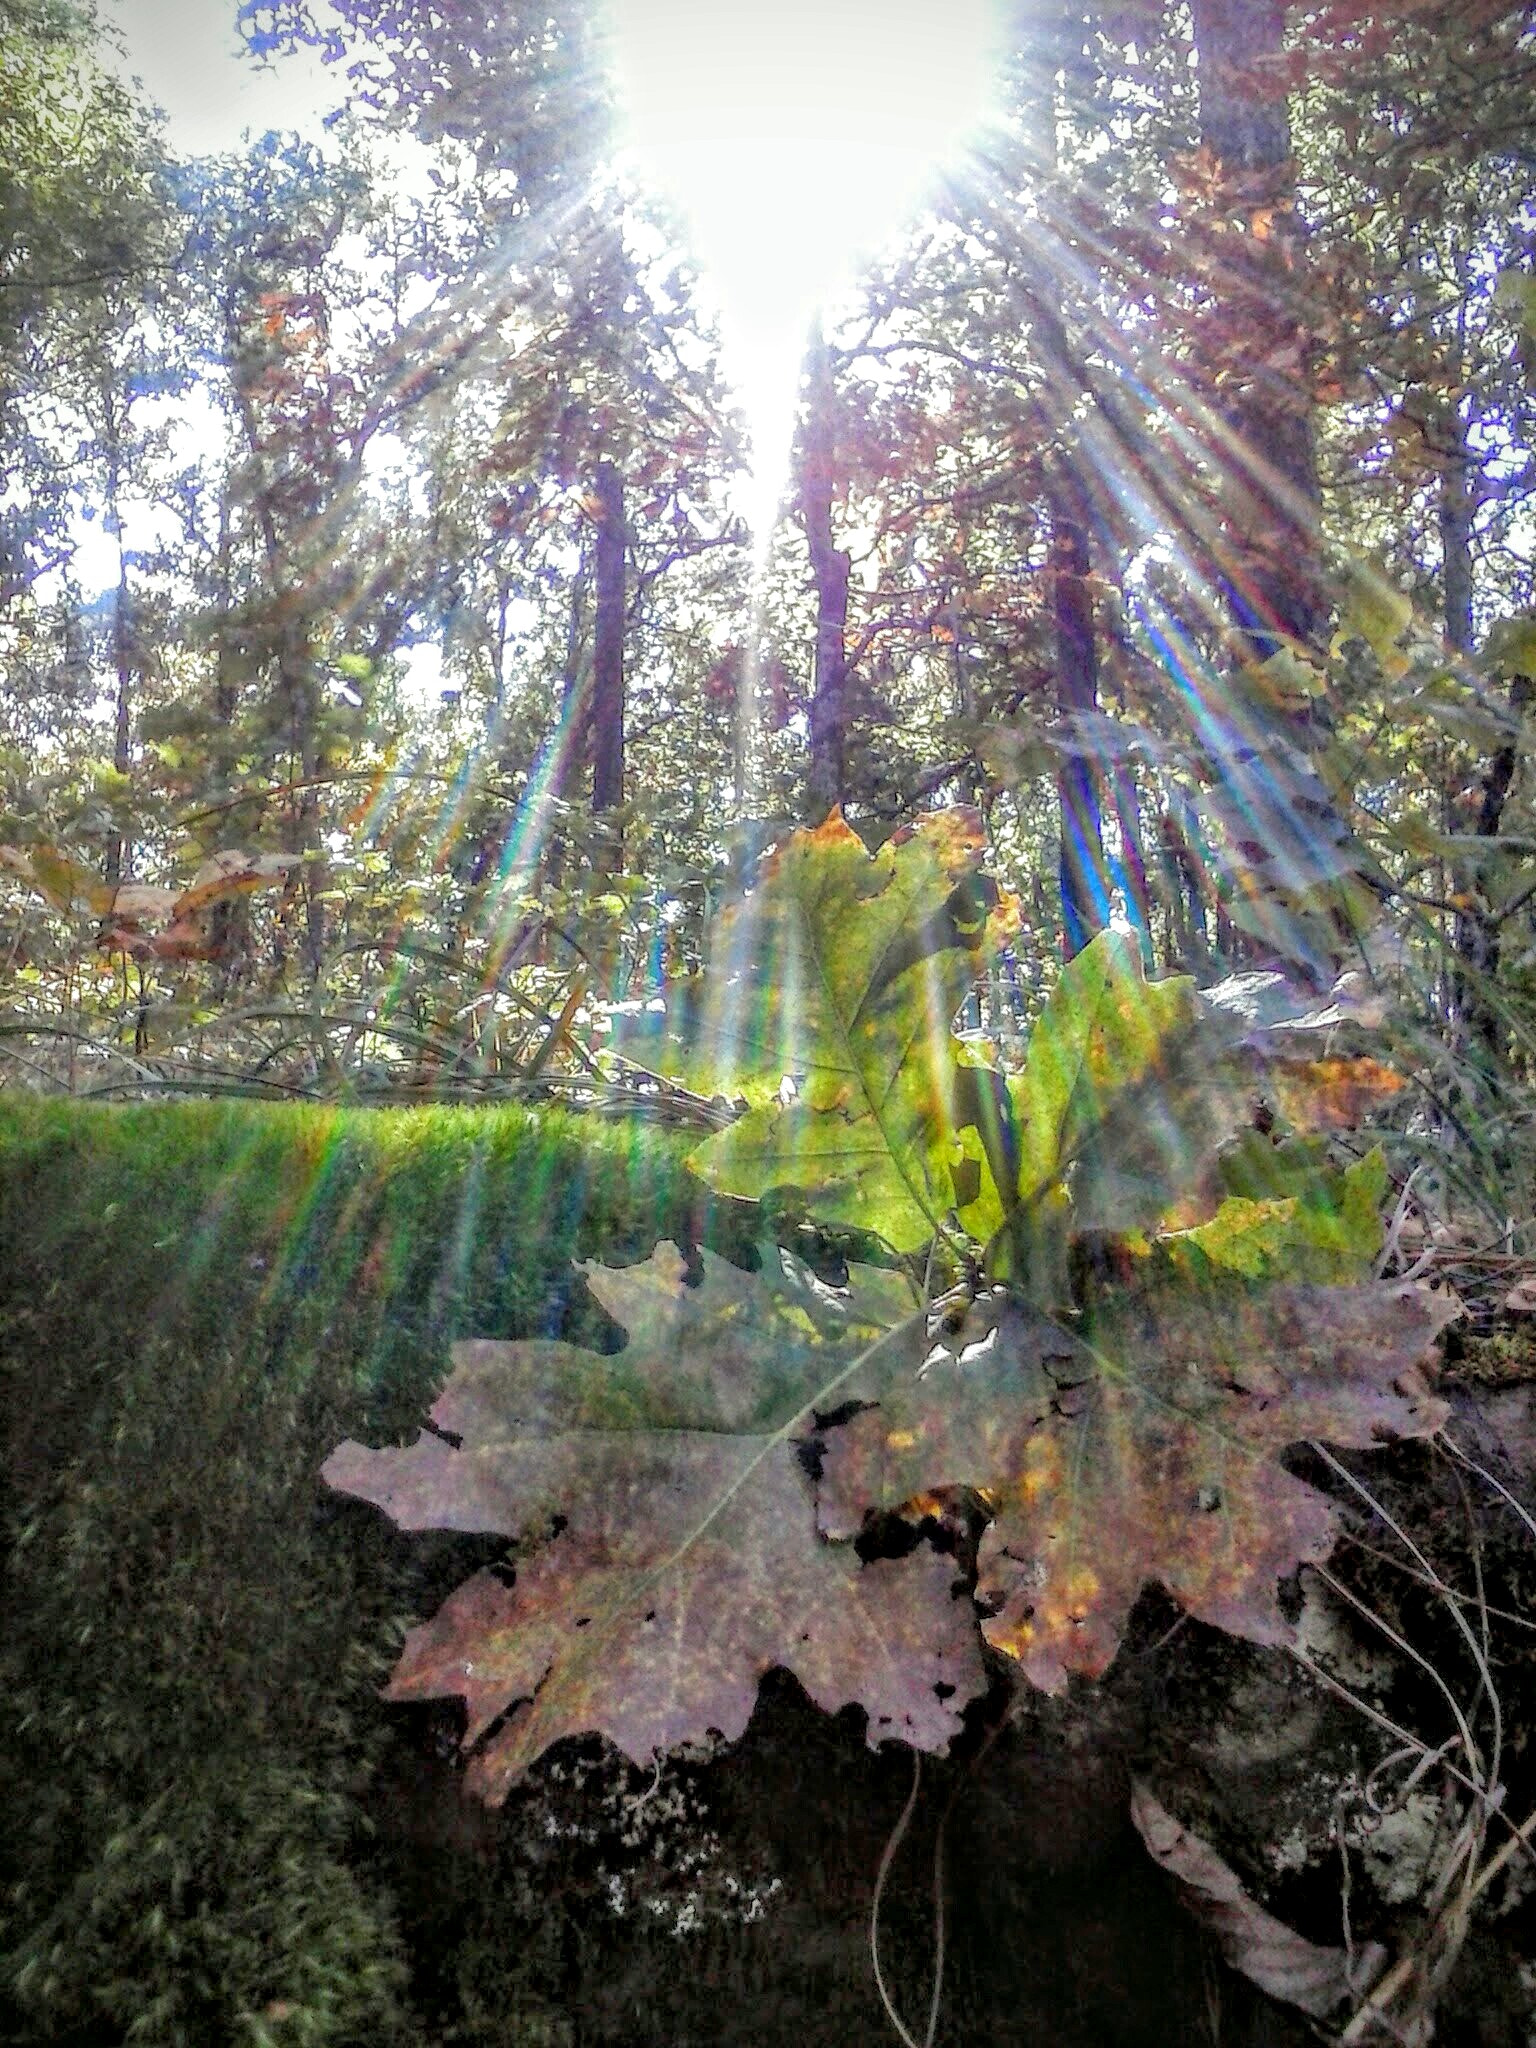 LG OPTIMUS L3 II sample photo. October in the ouachita mountains i photography